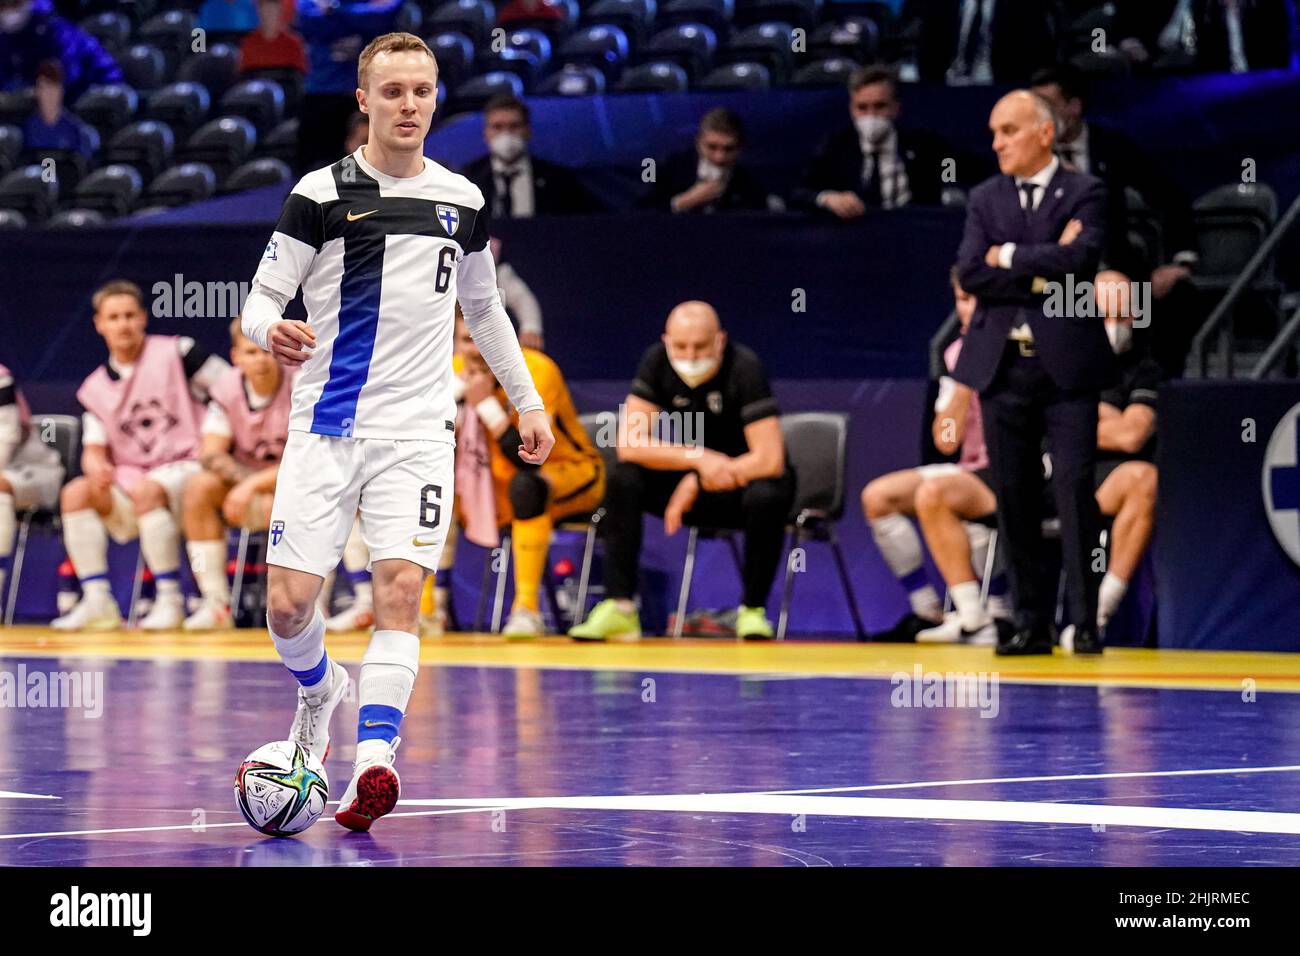 AMSTERDAM, NETHERLANDS - JANUARY 31: Jukka Kytola of Finland during the Men's Futsal Euro 2022 Quarterfinals match between Portugal and the Finland at the Ziggo Dome on January 31, 2022 in Amsterdam, Netherlands (Photo by Jeroen Meuwsen/Orange Pictures) Stock Photo